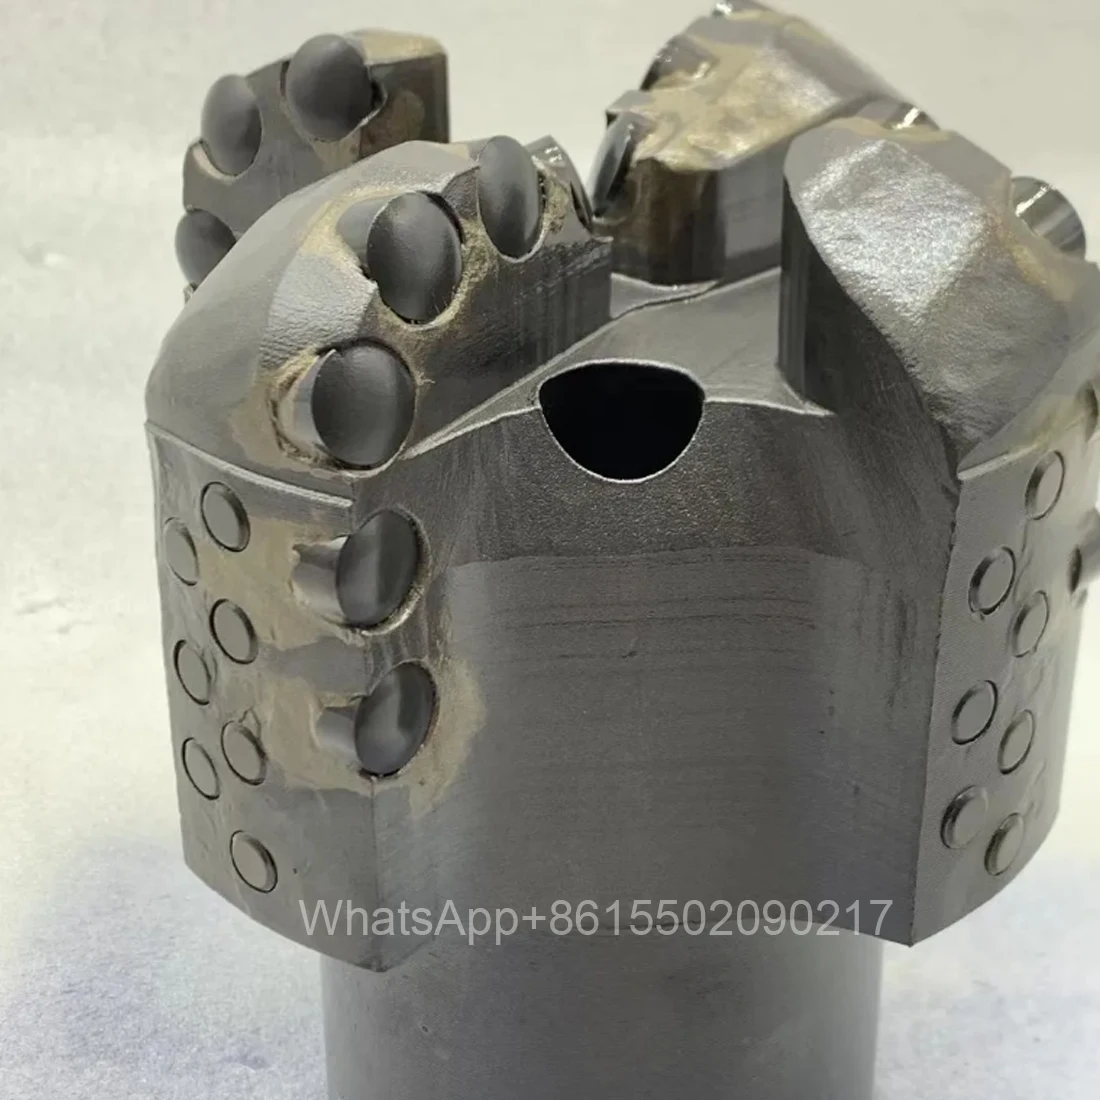 120mm-152mm full drill bit/Carbide Drill Bit Body PDC Bit for Water Well Drilling Geological Drilling Steel